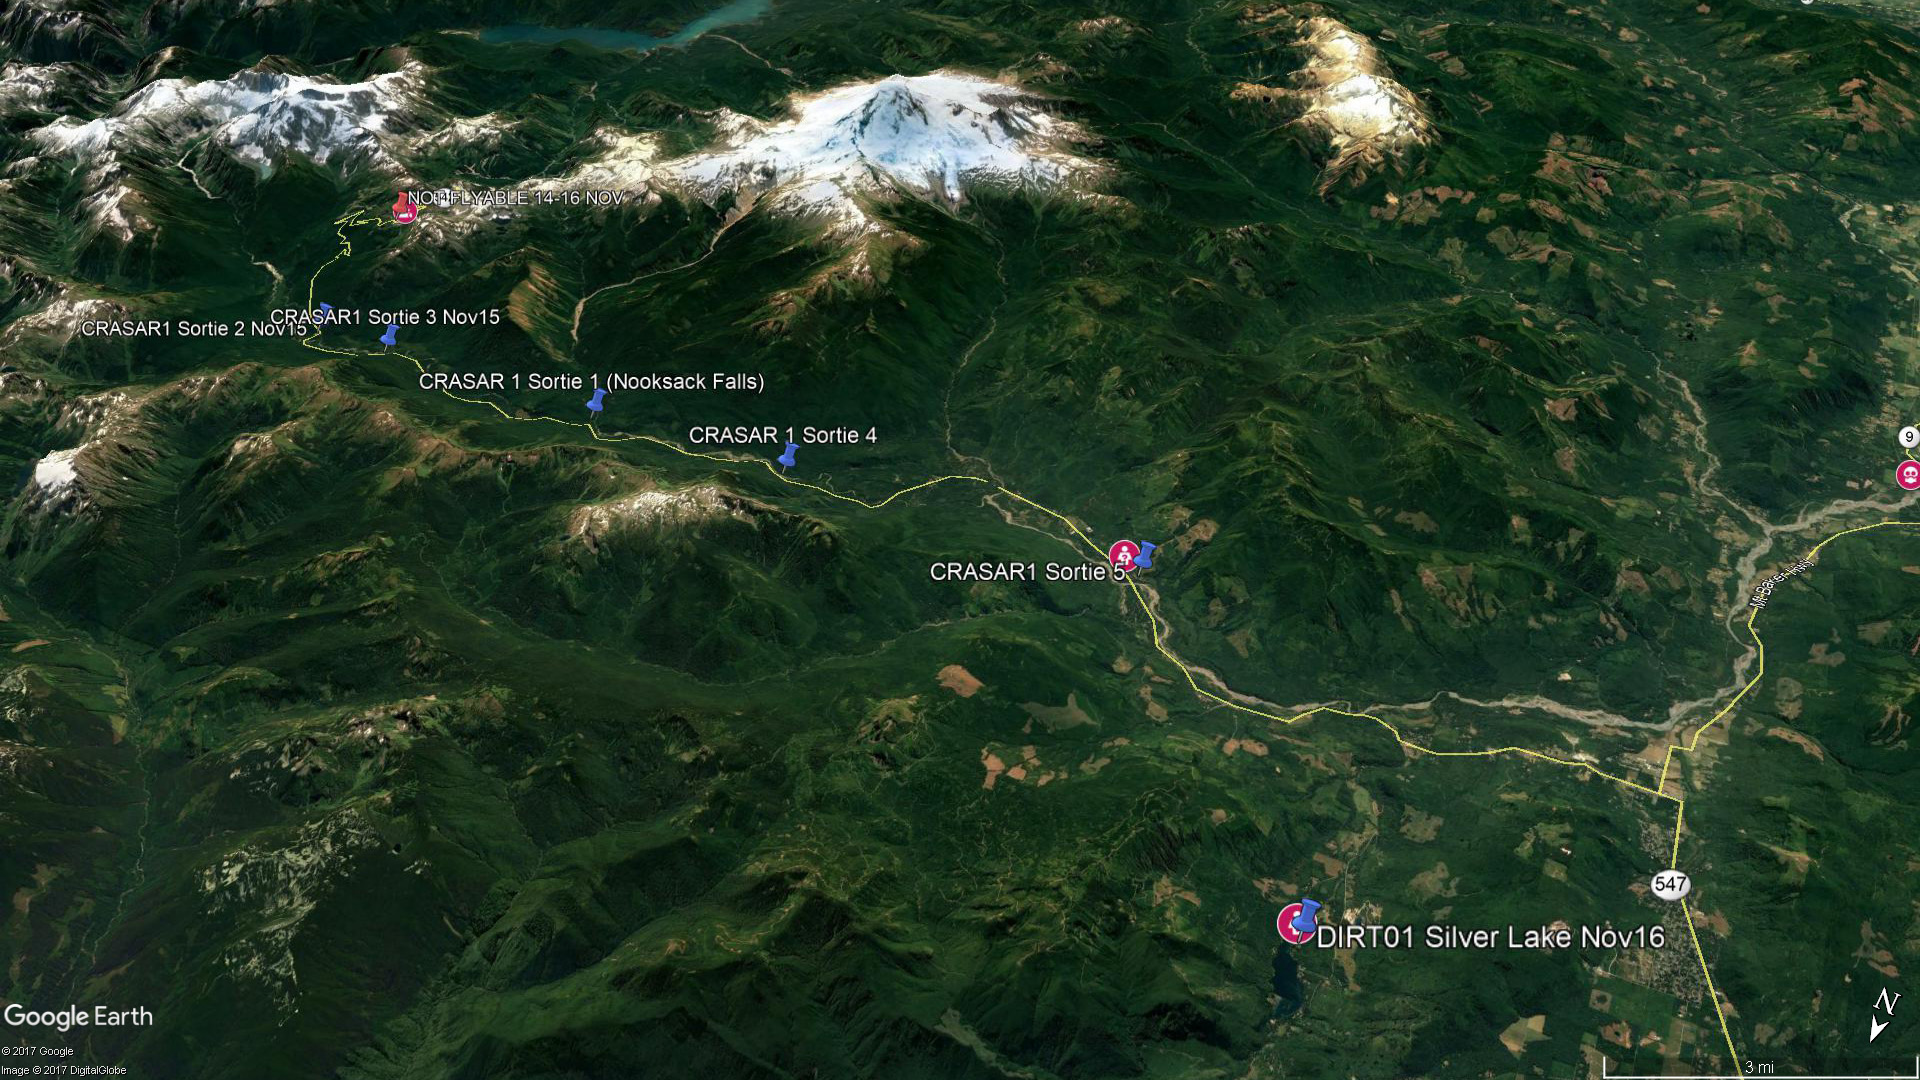 This Google Earth image serves as a location reference for panoramic photos taken in various locations near Mount Baker in Whatcom County. Mount Baker is the dominant peak at the top of the map, the tallest mountain in the North Cascade range.